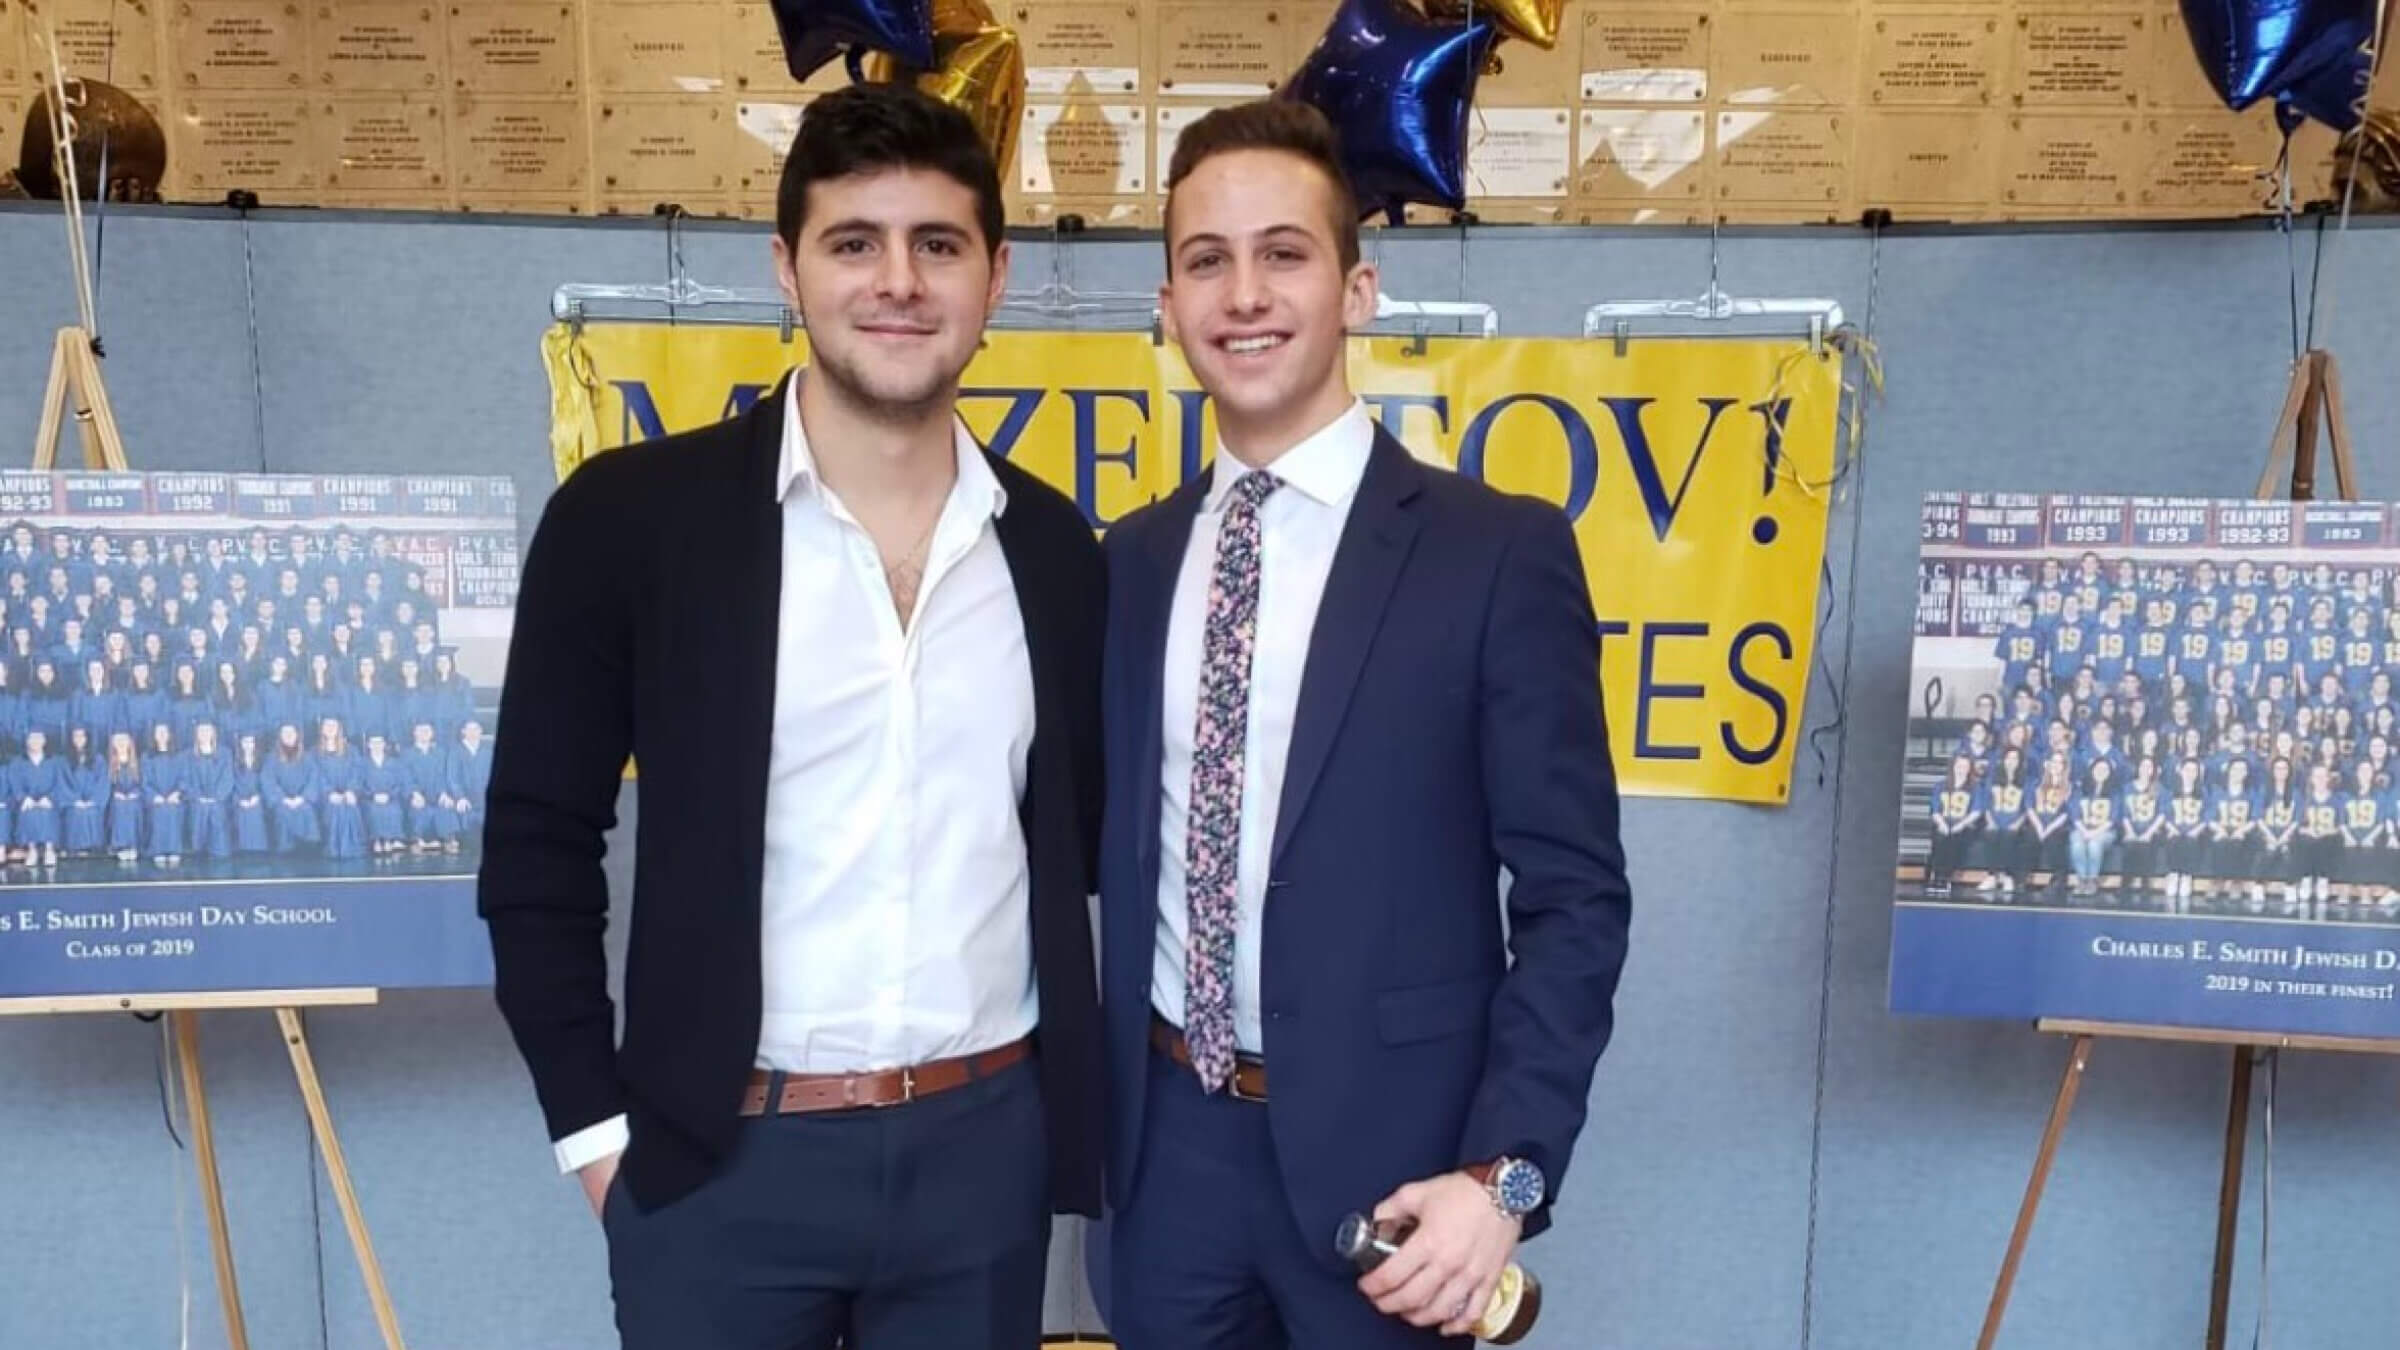 IDF reservist Omer Balva was killed in an anti-tank missile attack on Friday. He is pictured here with  his best friend, Ethan Missner, at their 2019 graduation from the Charles E. Smith Jewish Day School in Rockville, Maryland